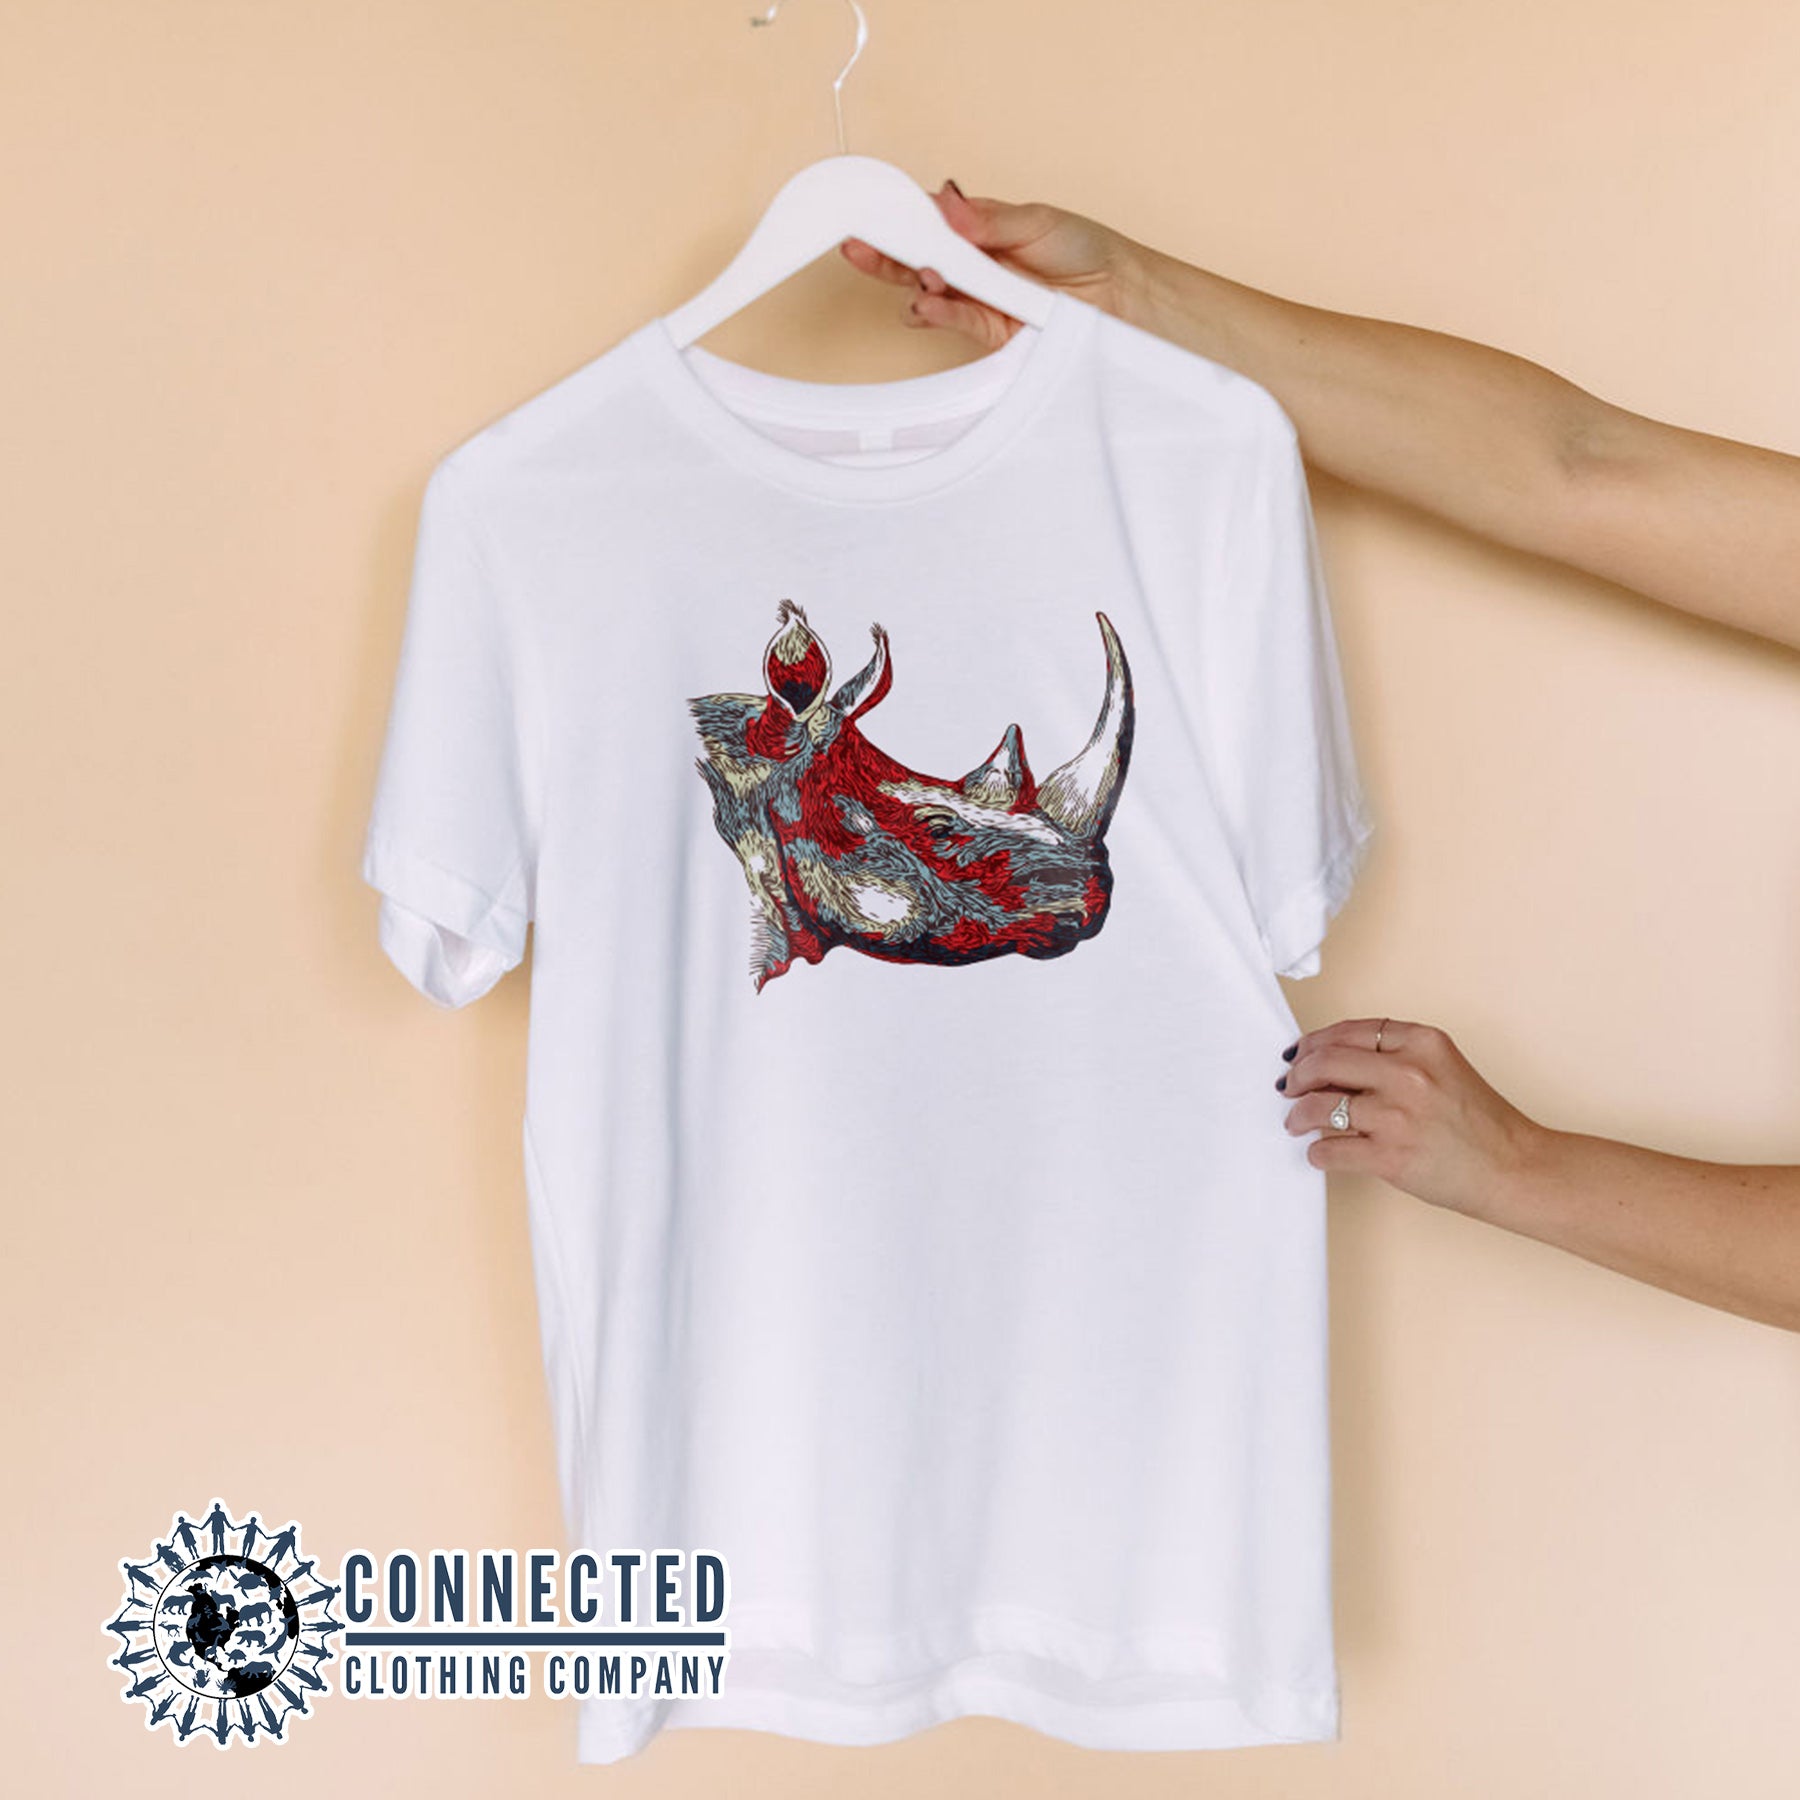 Hands Holding Hanger With  White Vanishing Into Extinction Rhino Tshirt - Connected Clothing Company - Ethically and Sustainable Clothing - 10% of proceeds are donated to rhino conservation